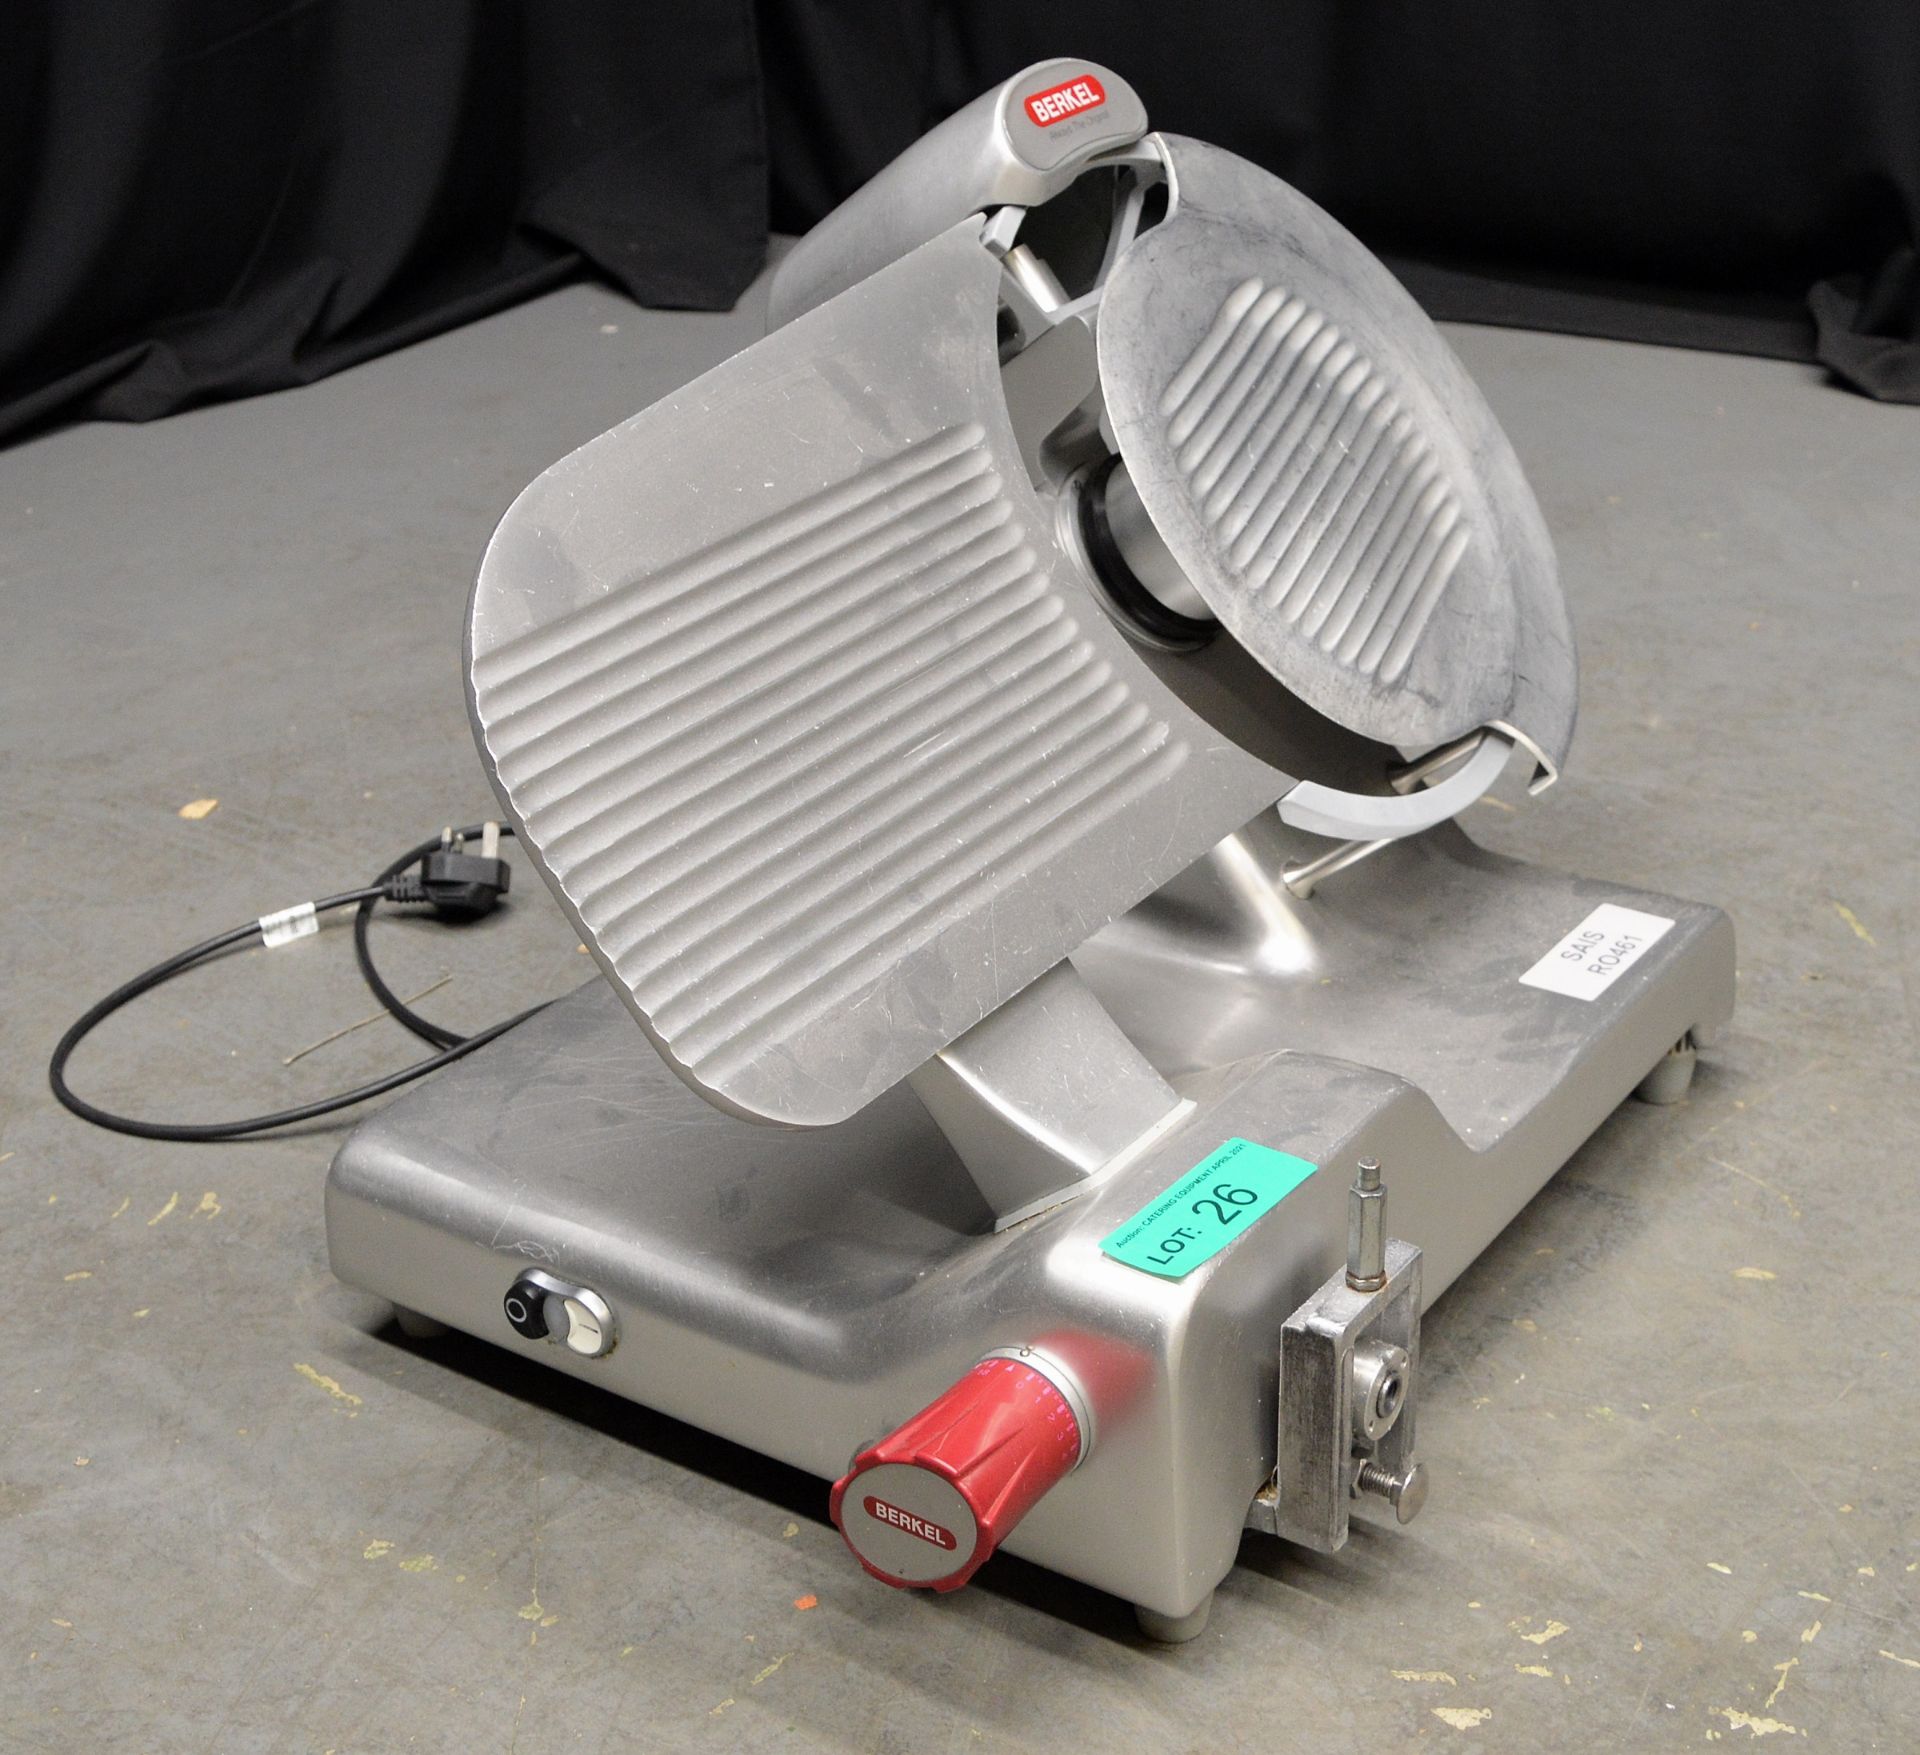 Berkel BSPGL04011A0F 12" Commercial Cooked Meat / Bacon Slicer, single phase electric - Image 2 of 5